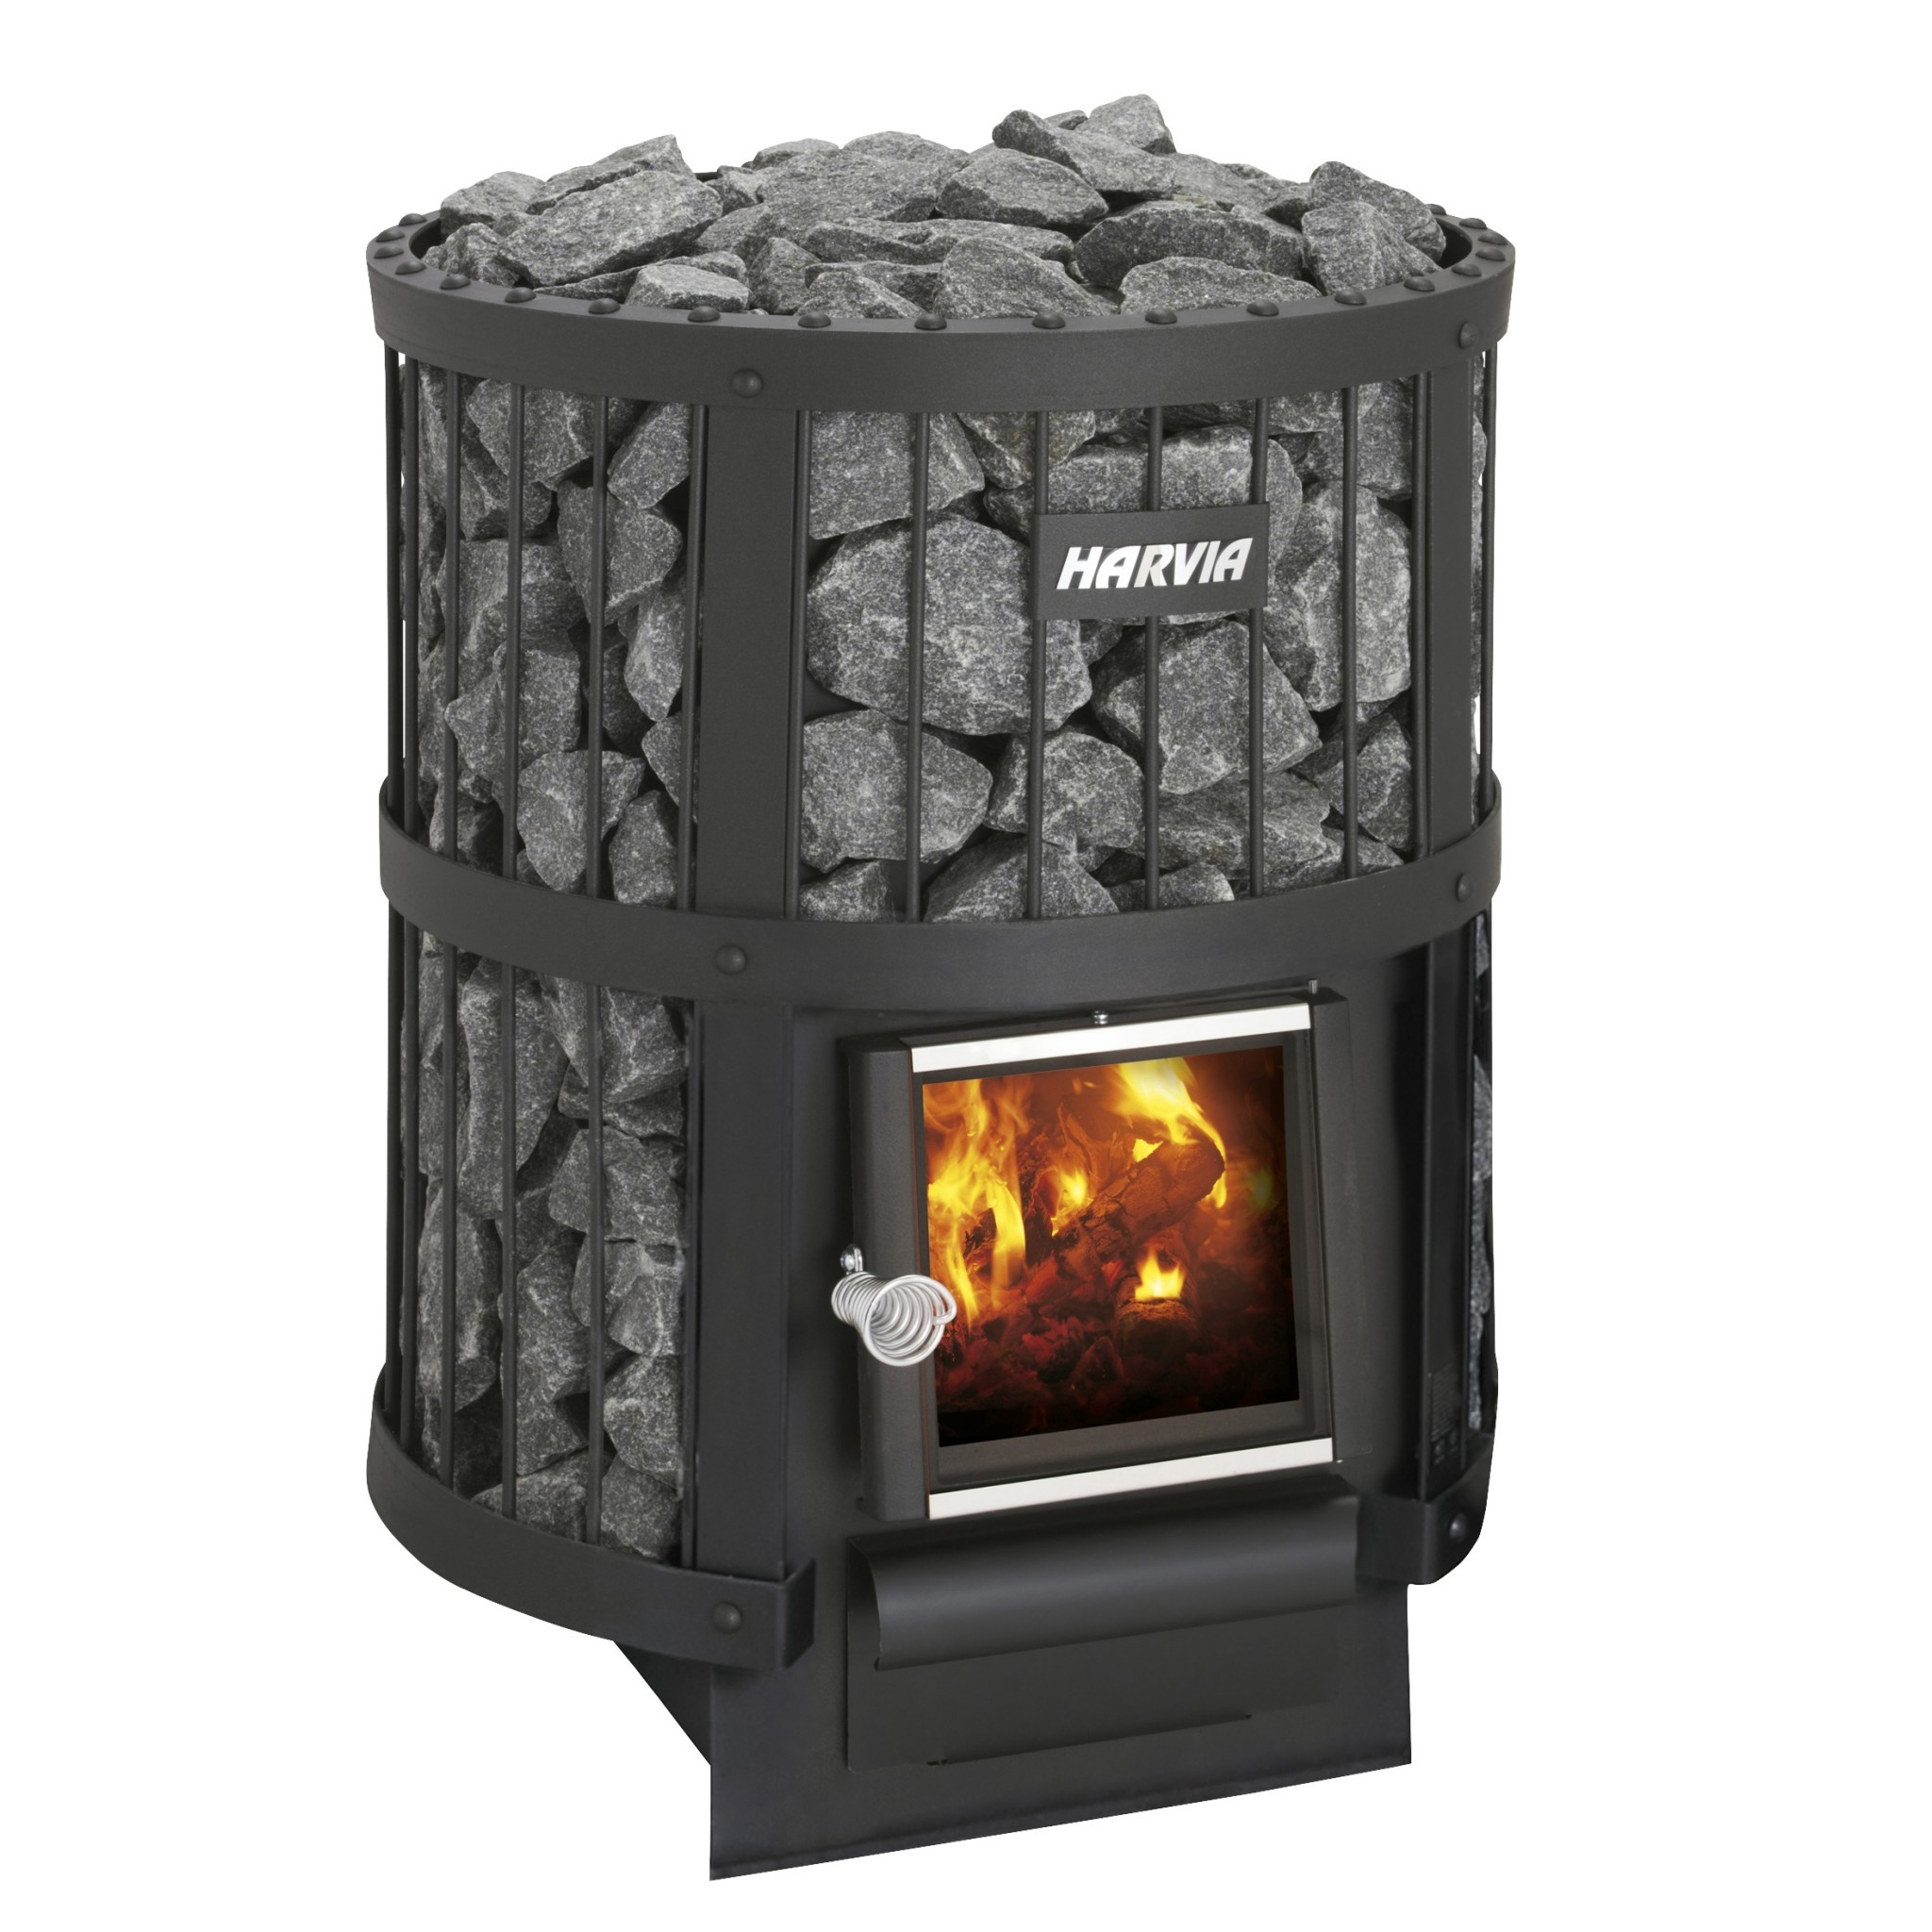 Image of a Harvia Legend Wood Burning Heater